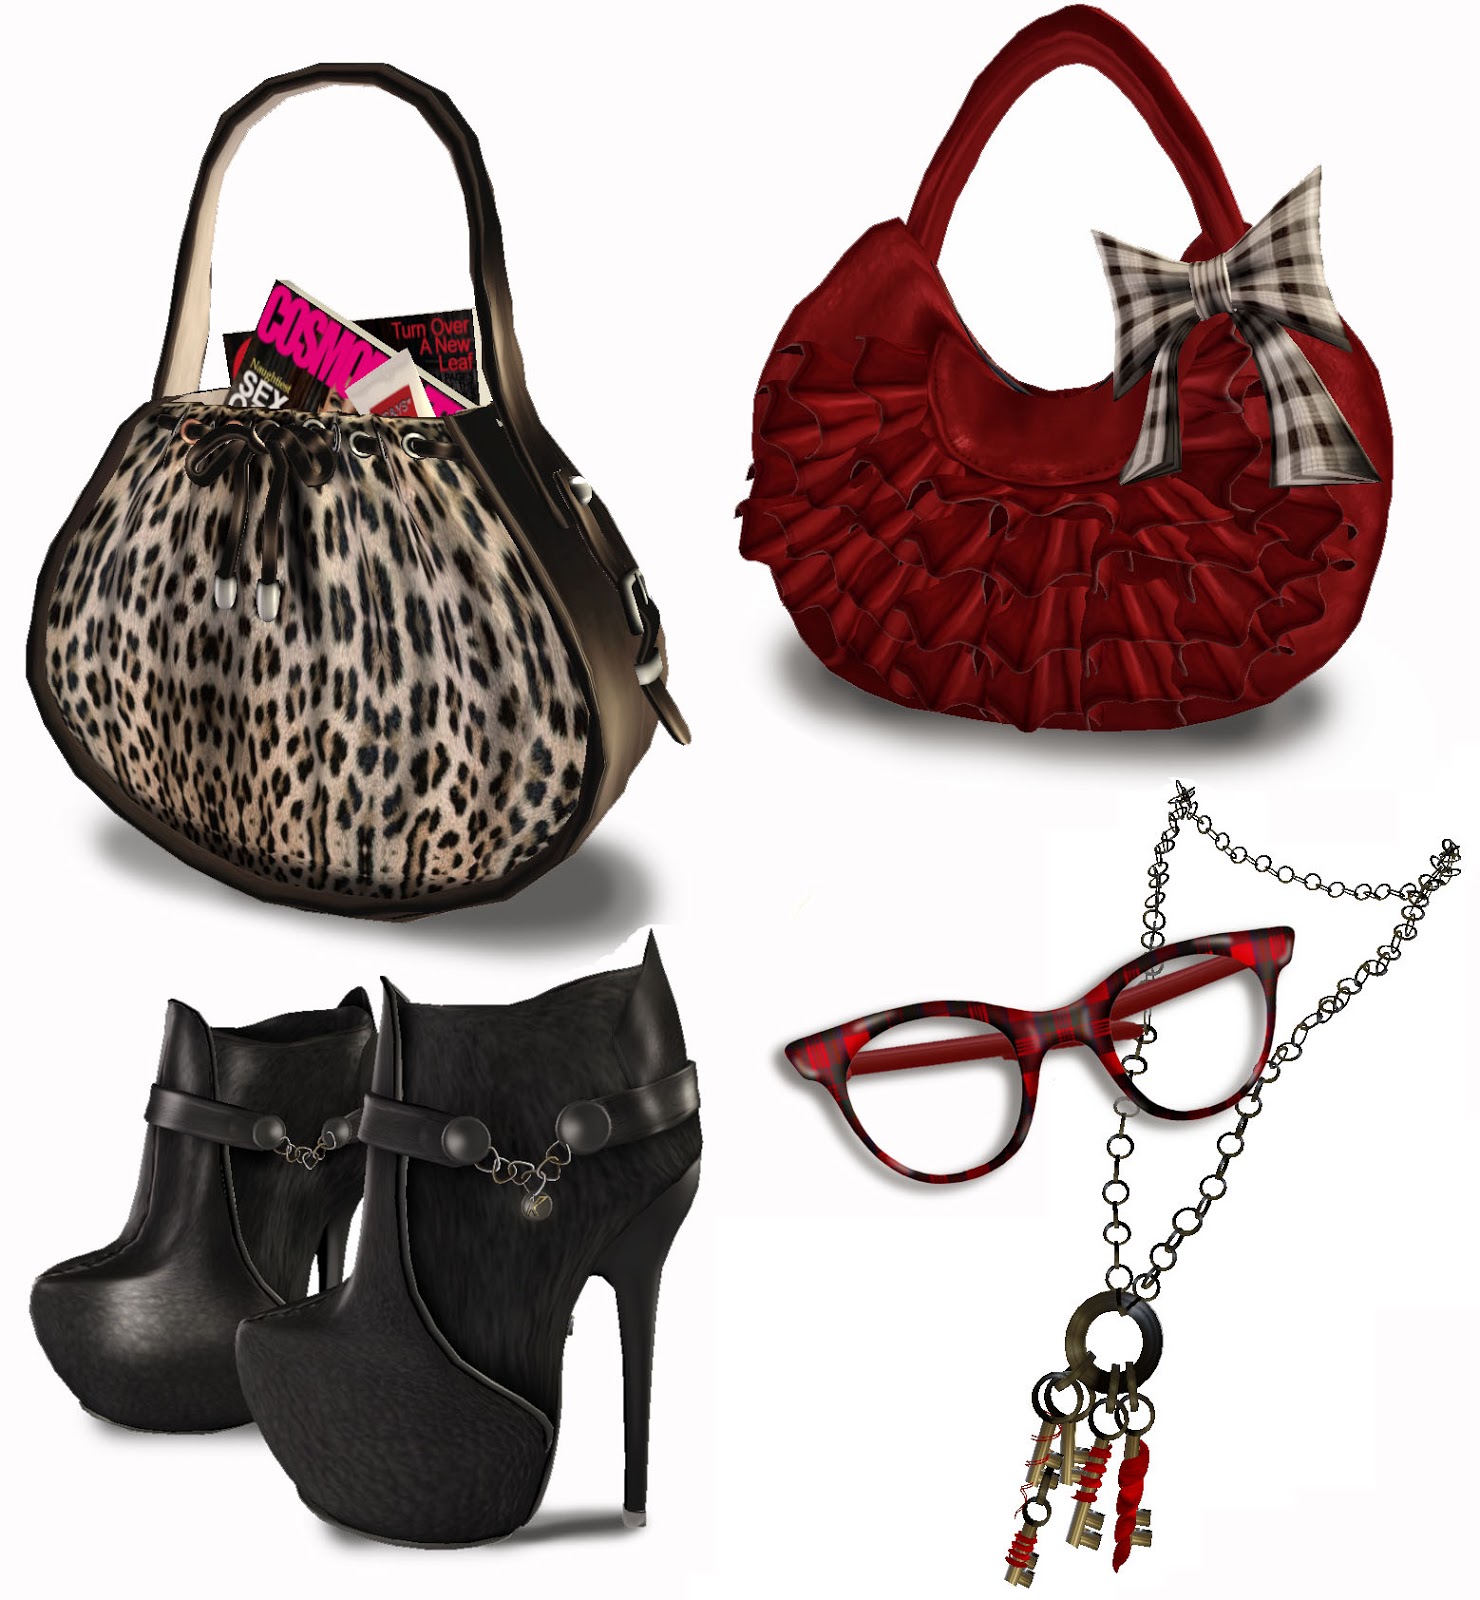 Online Shopping in India-Online Shop for Shoes, Clothing, Accessories